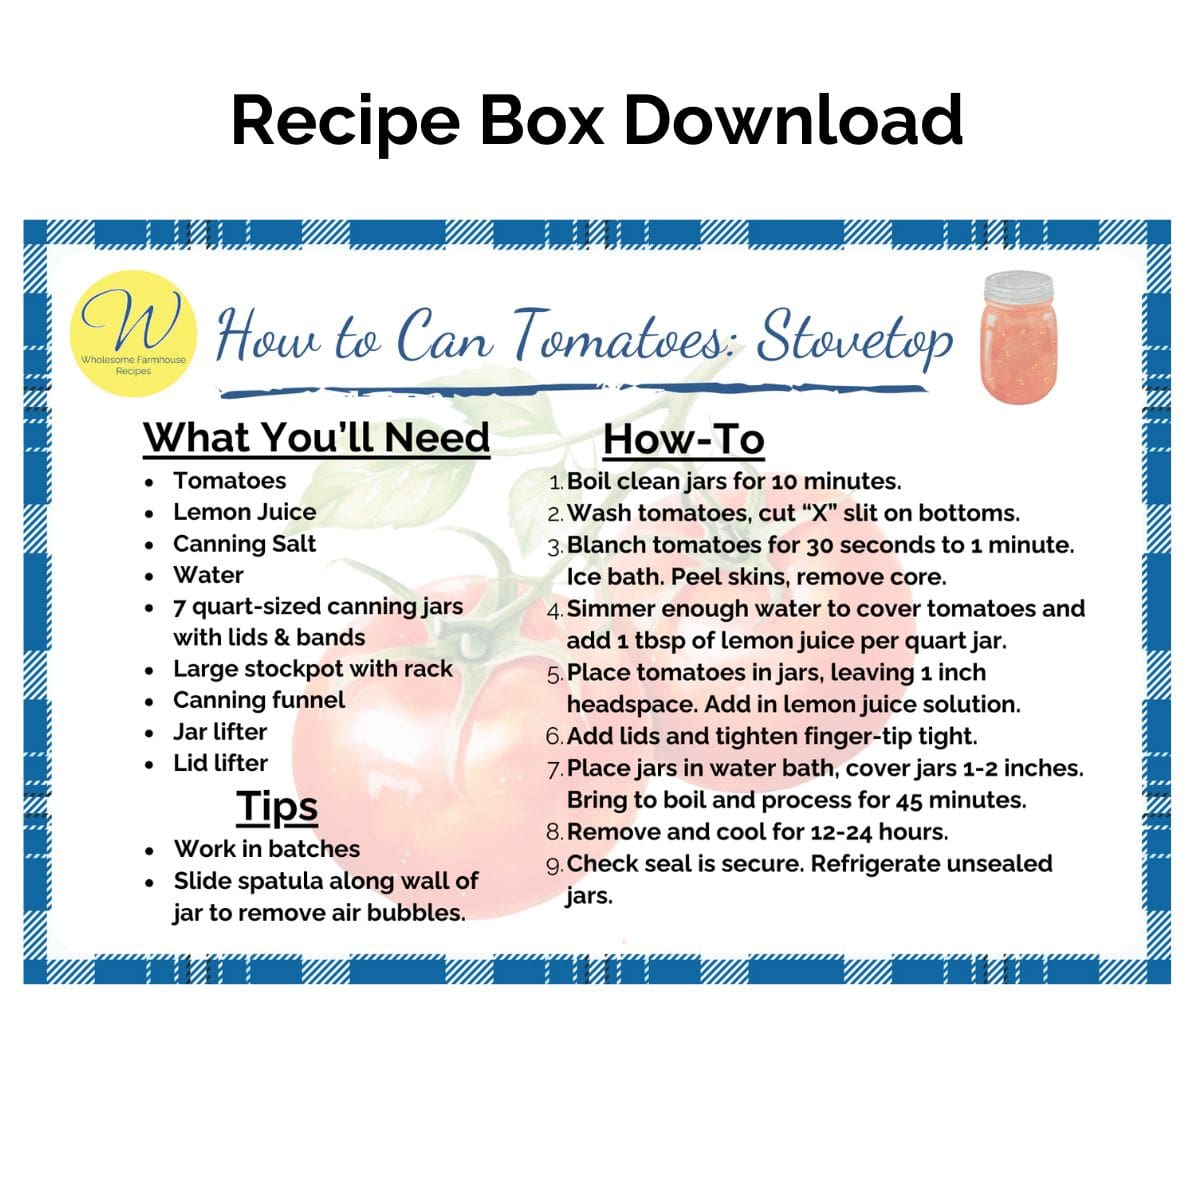 Recipe Box Download - Can Tomatoes